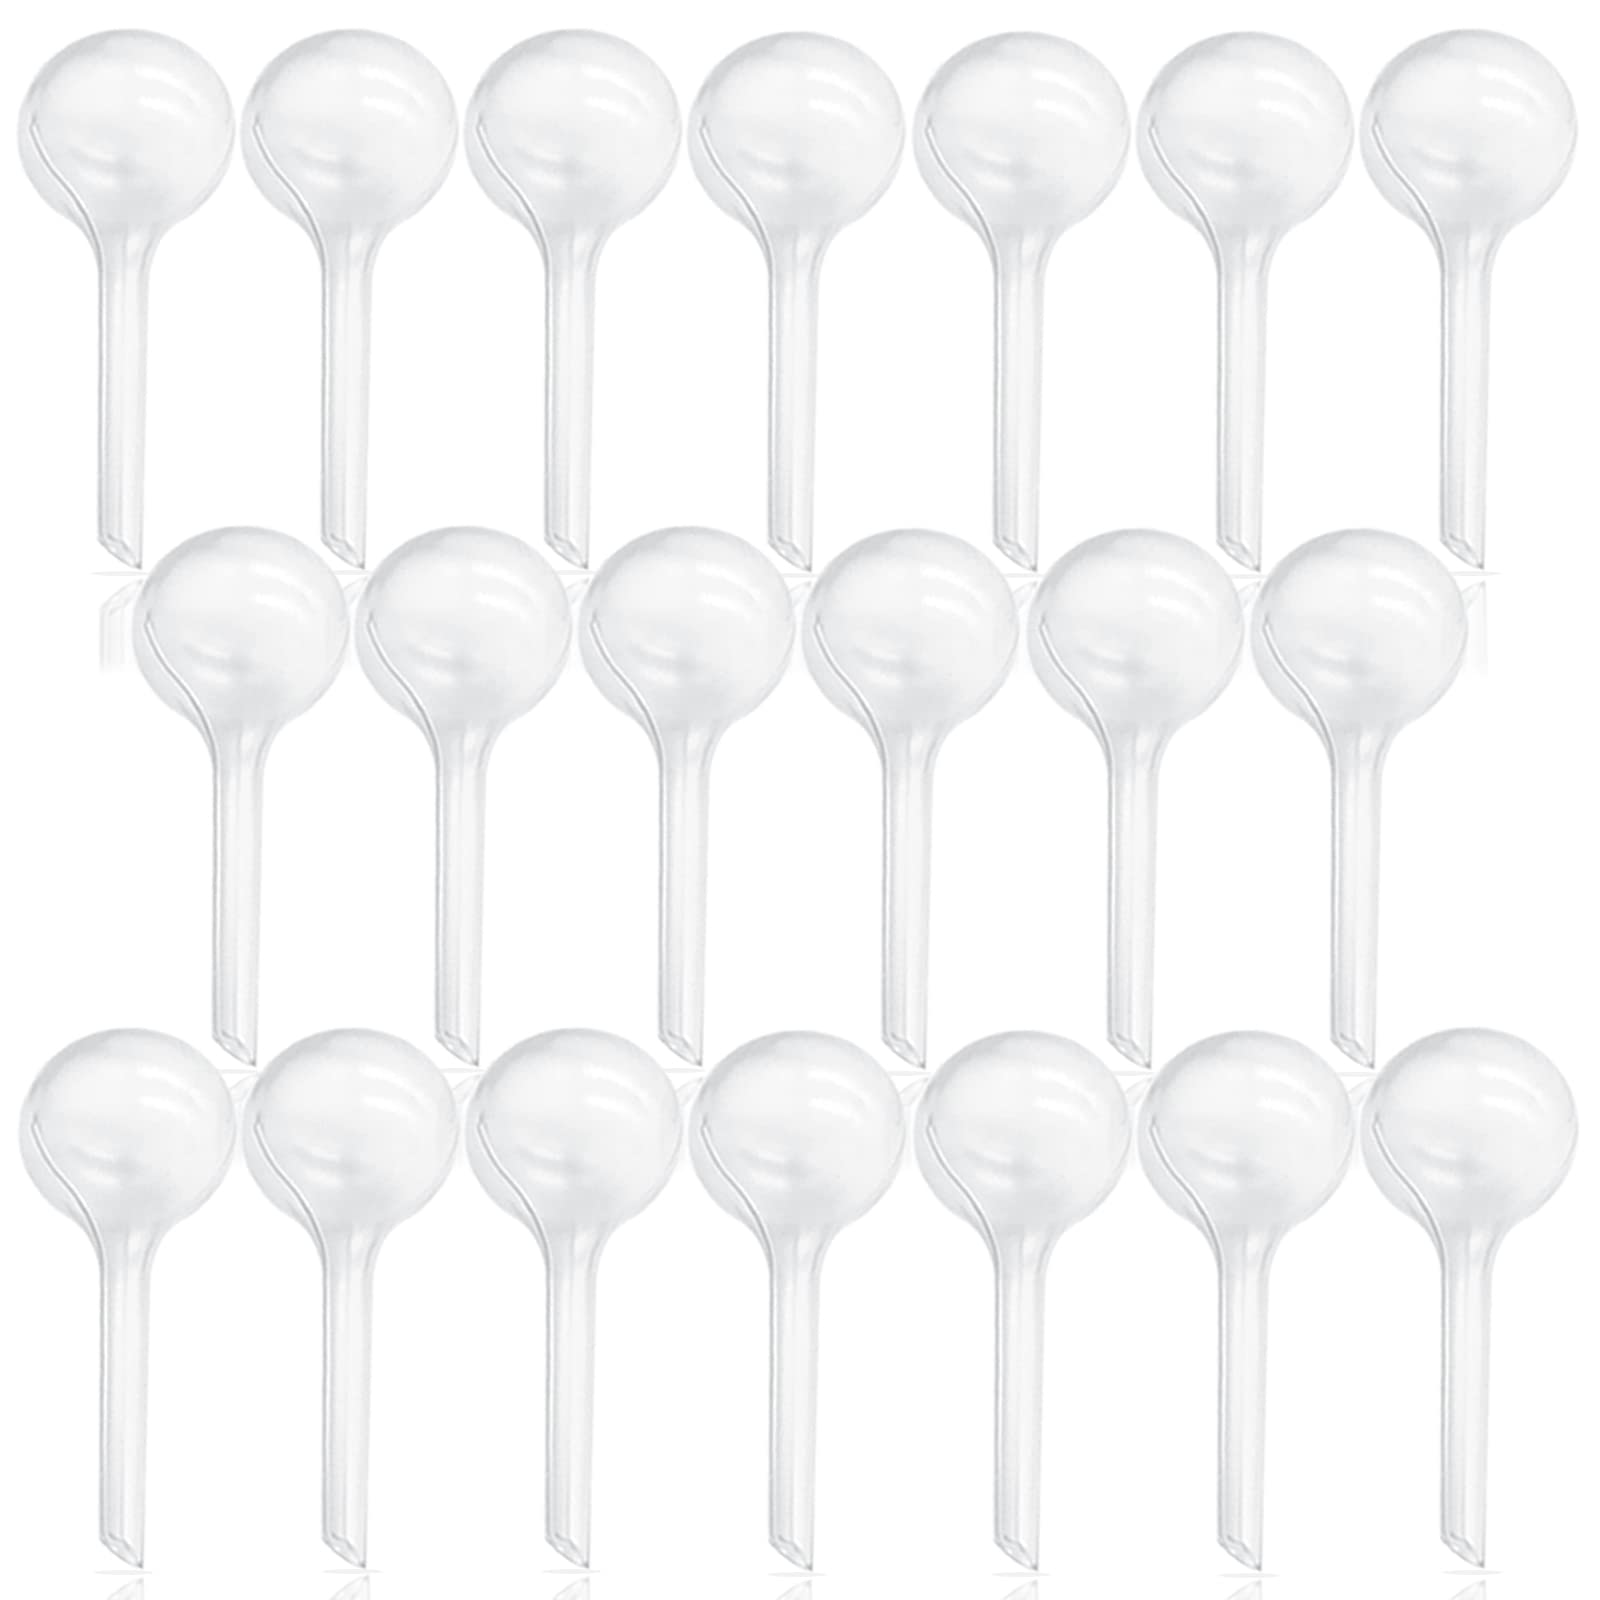 OJYUDD 20 Pcs Plant Watering Bulbs,Clear Automatic Watering Globes,Plastic Watering Balls for Plant Indoor Outdoor,Garden Water Device